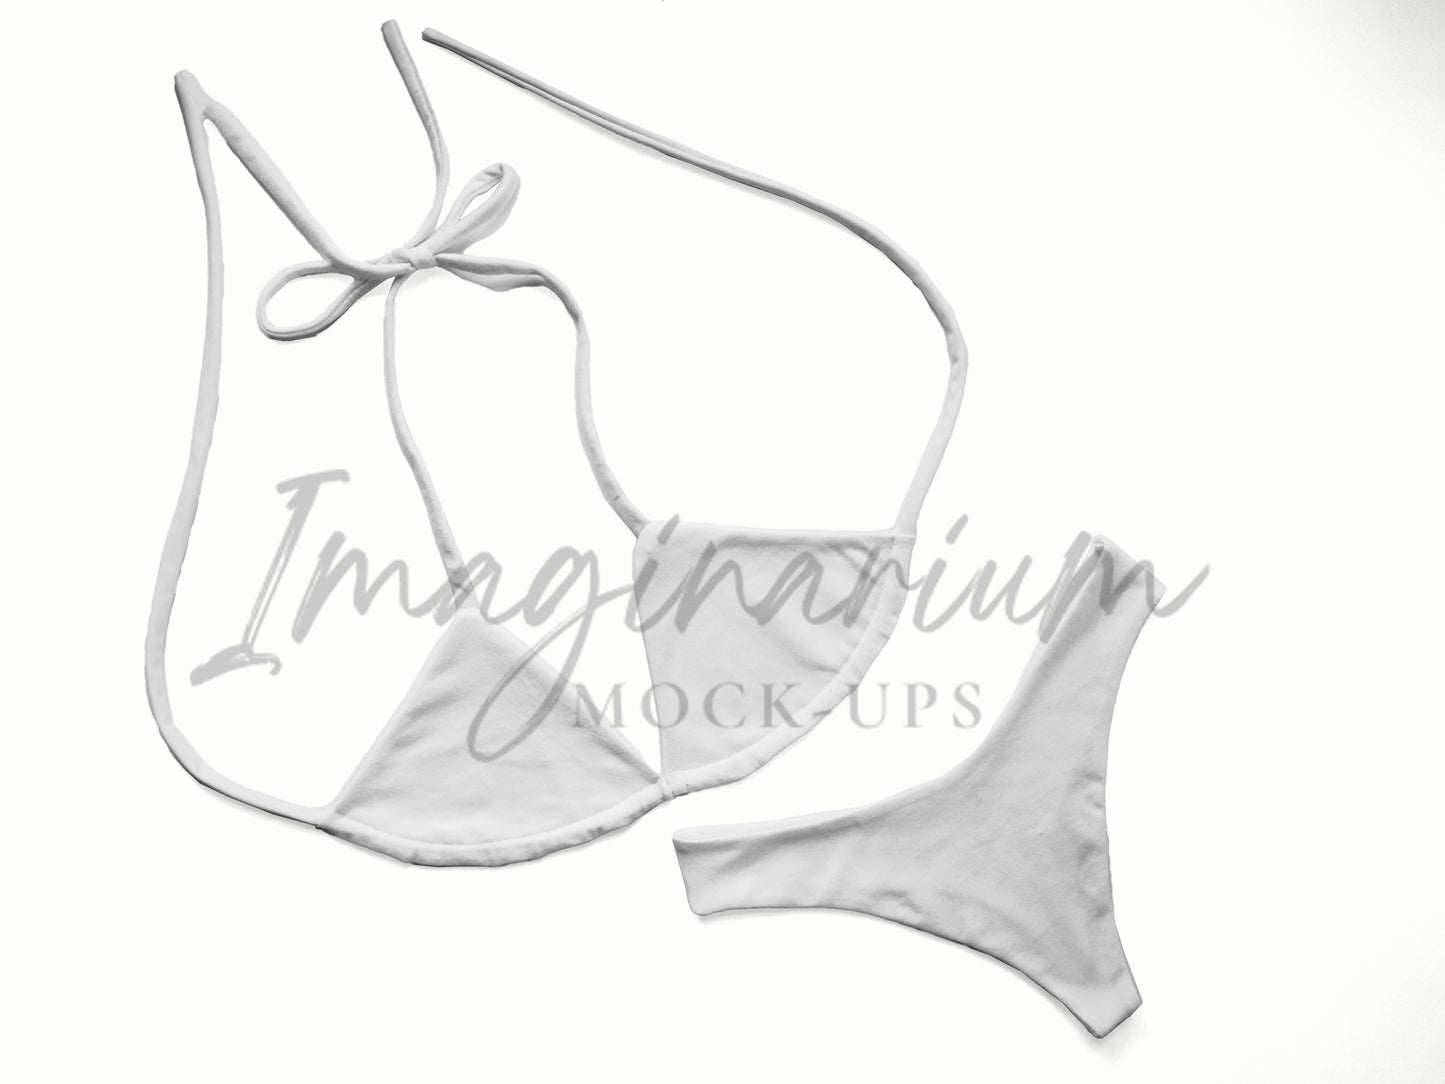 Adult Bikini Top and Bottoms Mock Up, Realistic Swimsuit Mockup for Photoshop and Procreate